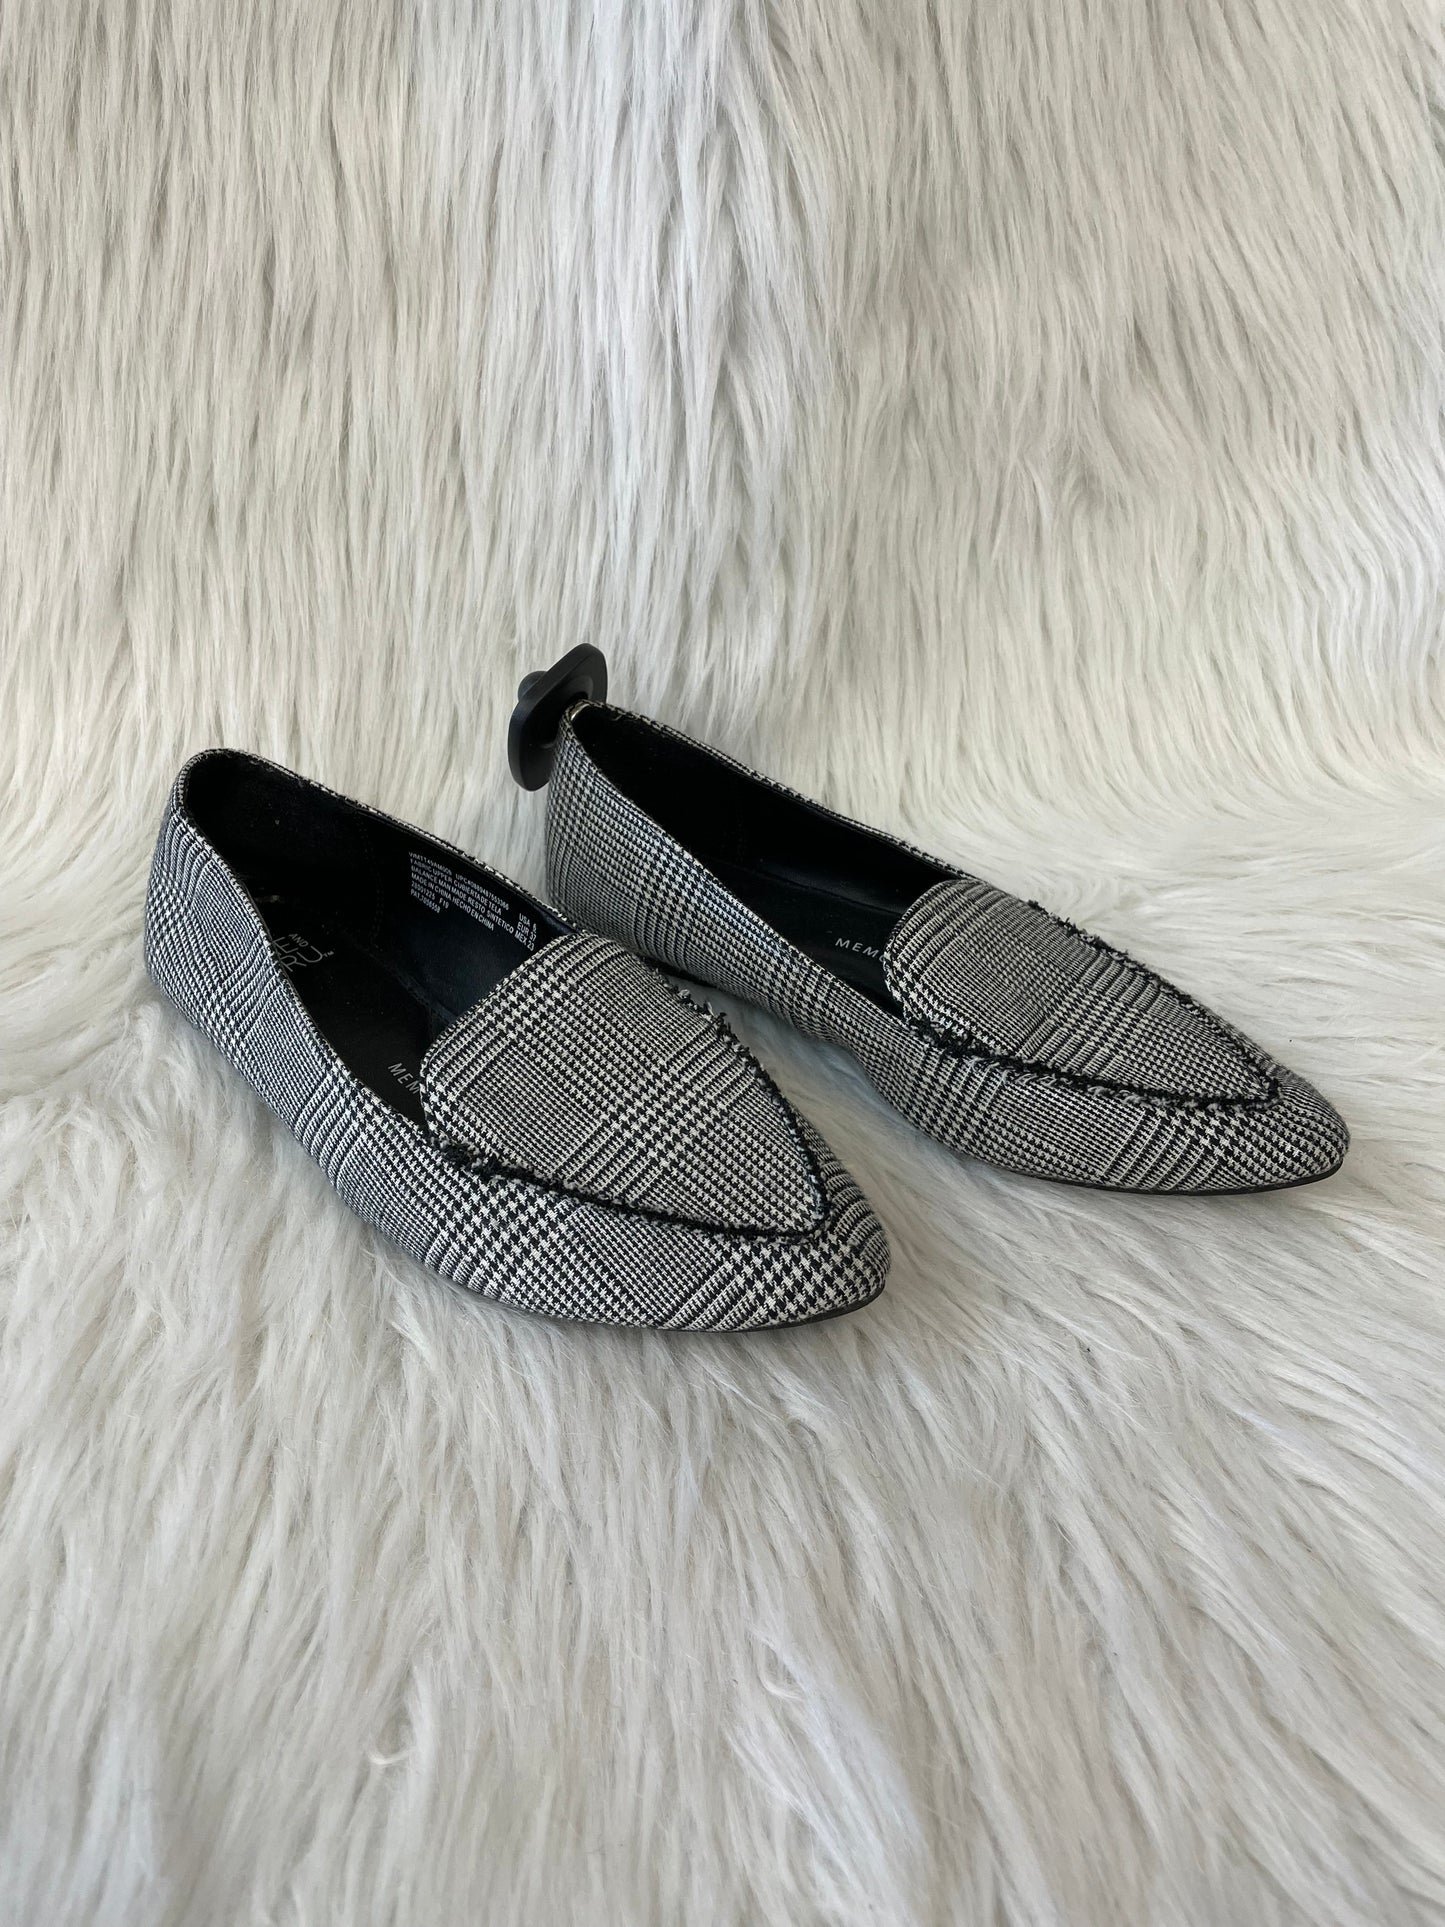 Black & White Shoes Flats Time And Tru, Size 6